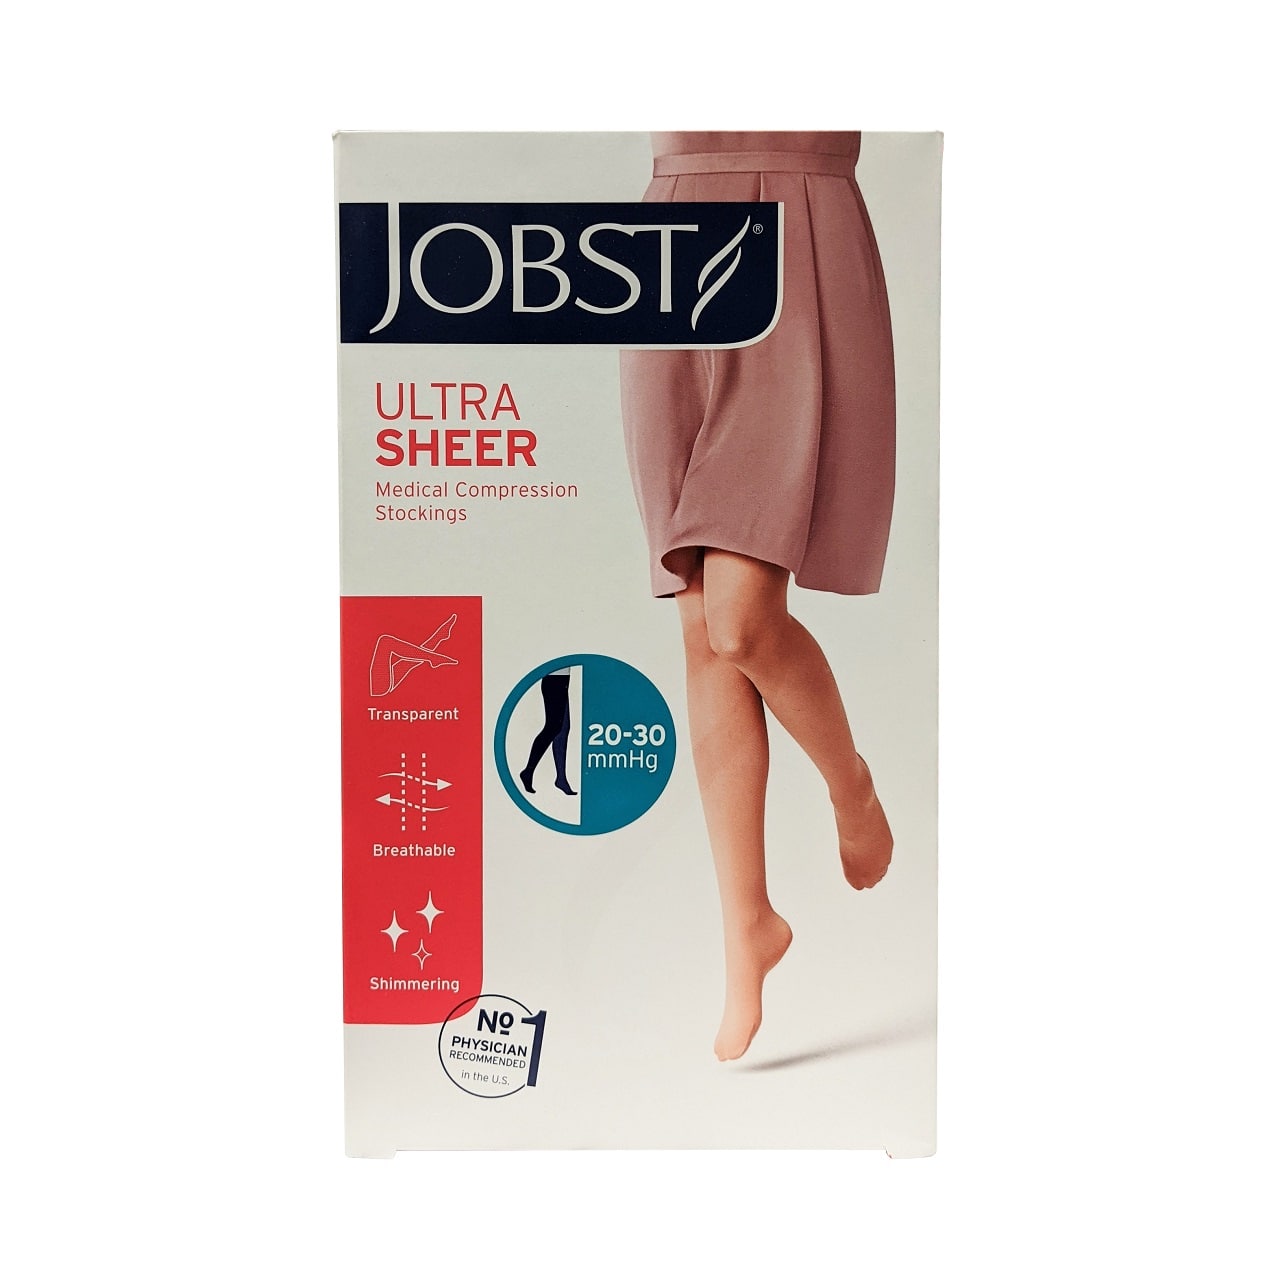 Product label for Jobst UltraSheer Compression Stockings 20-30 mmHg - Pantyhose / Closed Toe / Natural (Small)